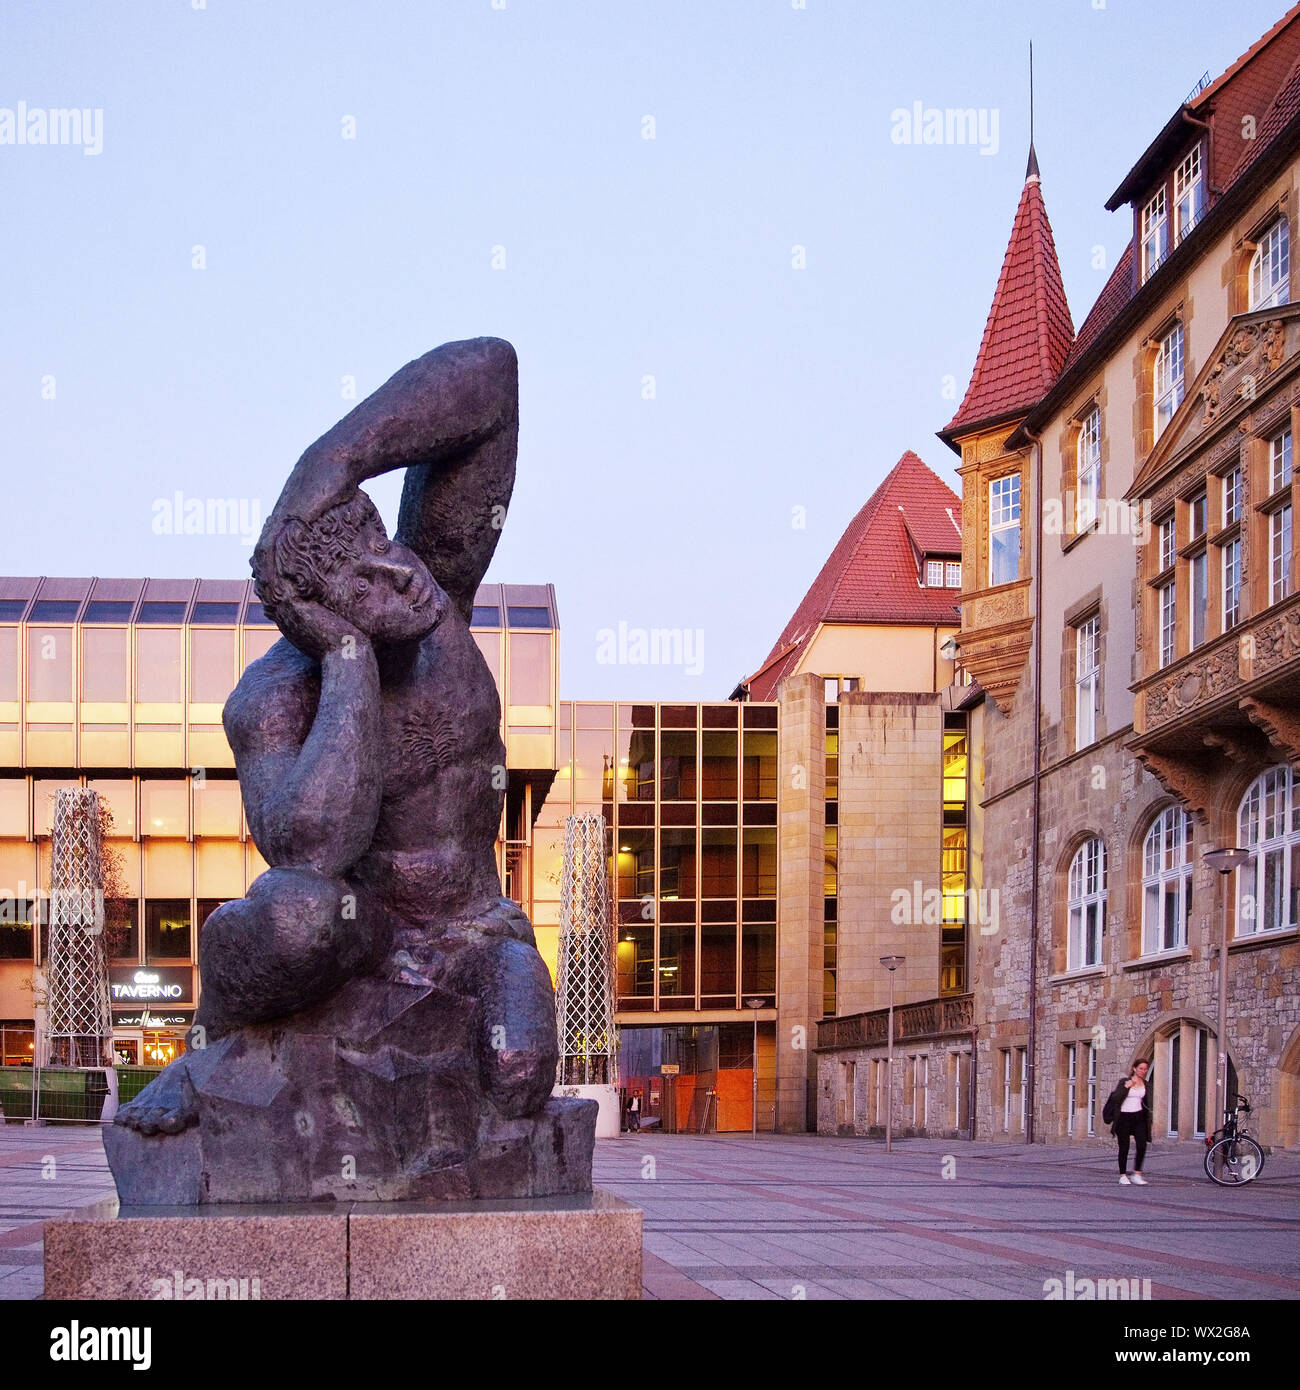 new and old town hall with sculpture, Bielefeld, North Rhine-Westphalia,Germany, Europe Stock Photo